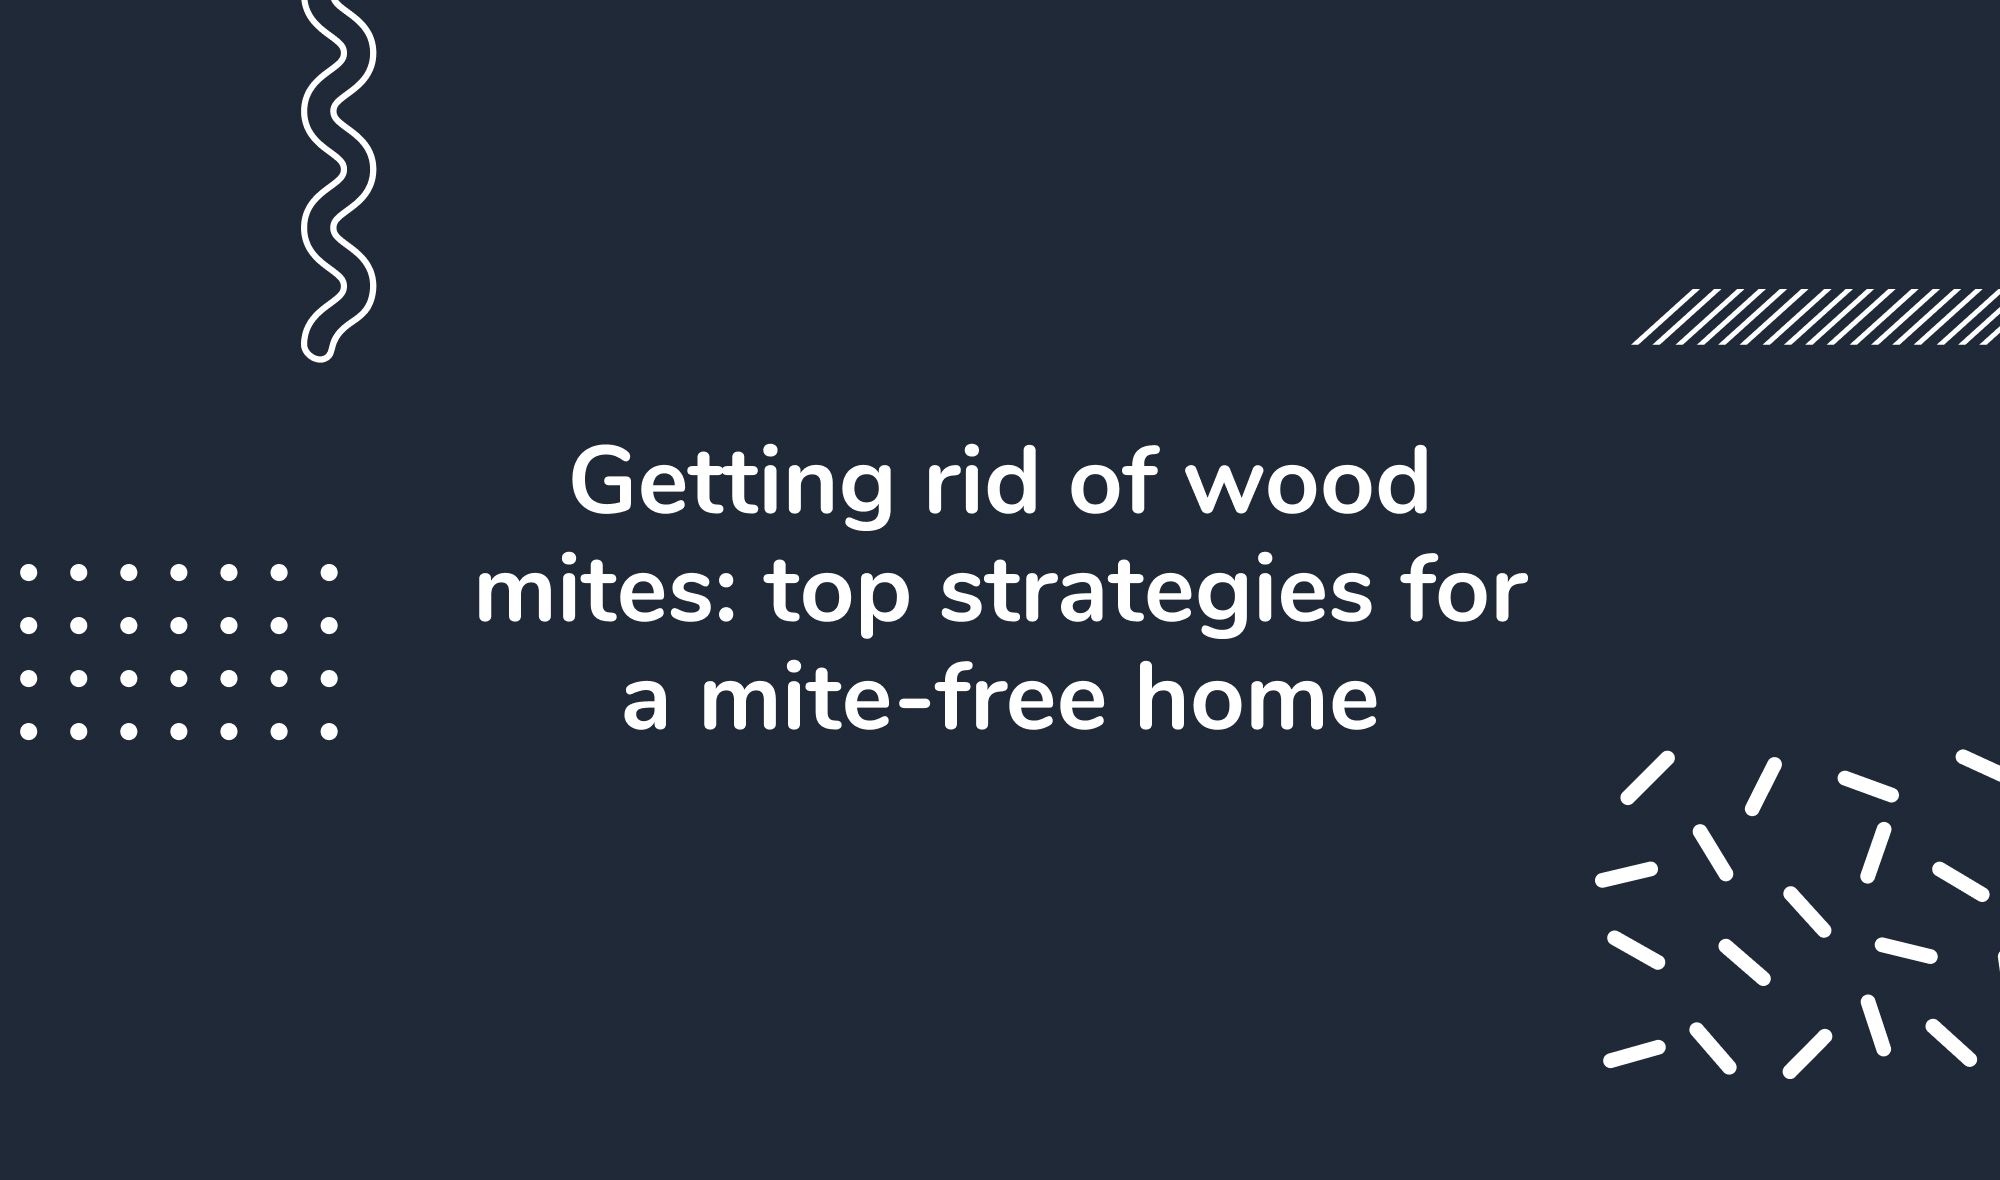 Getting rid of wood mites: top strategies for a mite-free home